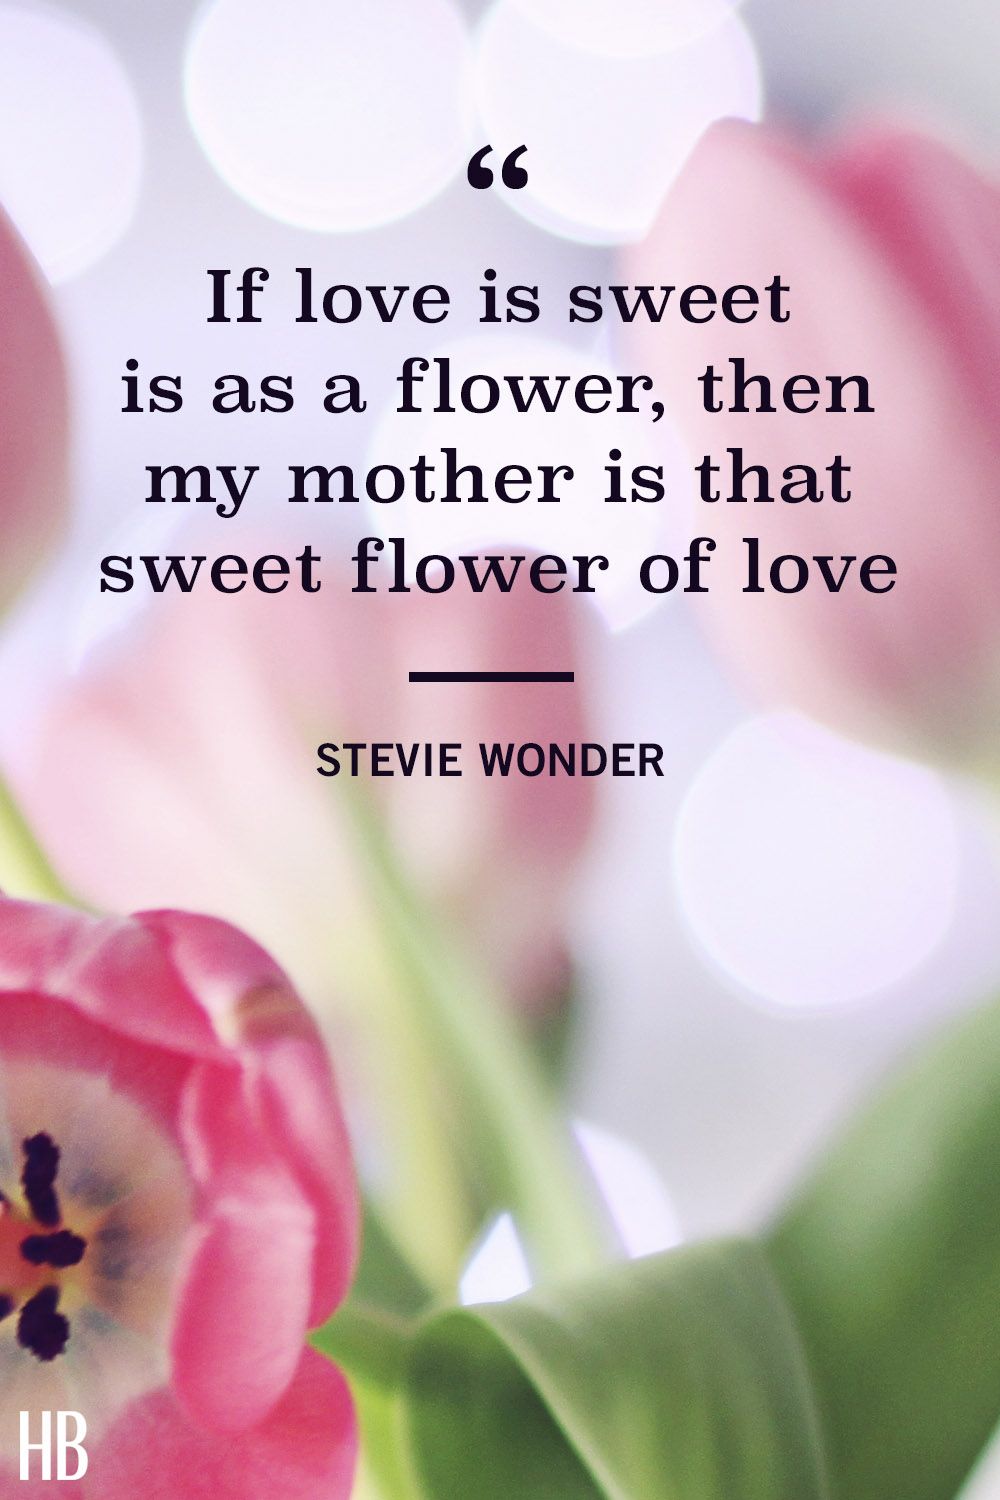 20 Best Mother's Day Quotes - Inspiring Quotes About Moms